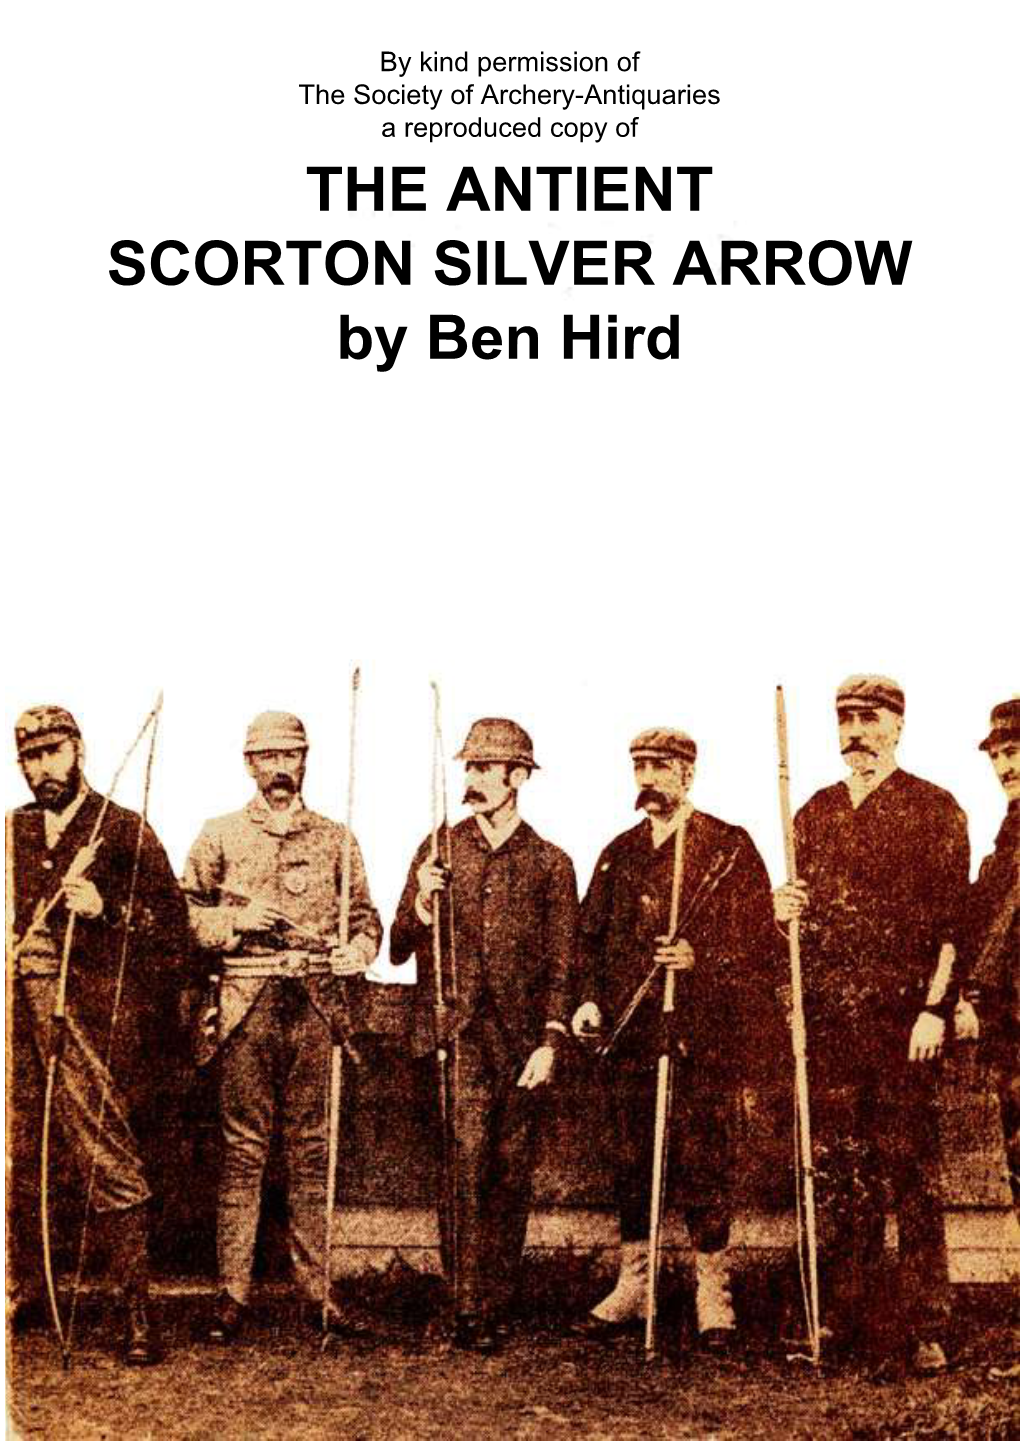 THE ANTIENT SCORTON SILVER ARROW by Ben Hird Ben Hird, the Author of This Book, Can Rightly Claim a Long Association with the Scorton Arrow Meeting